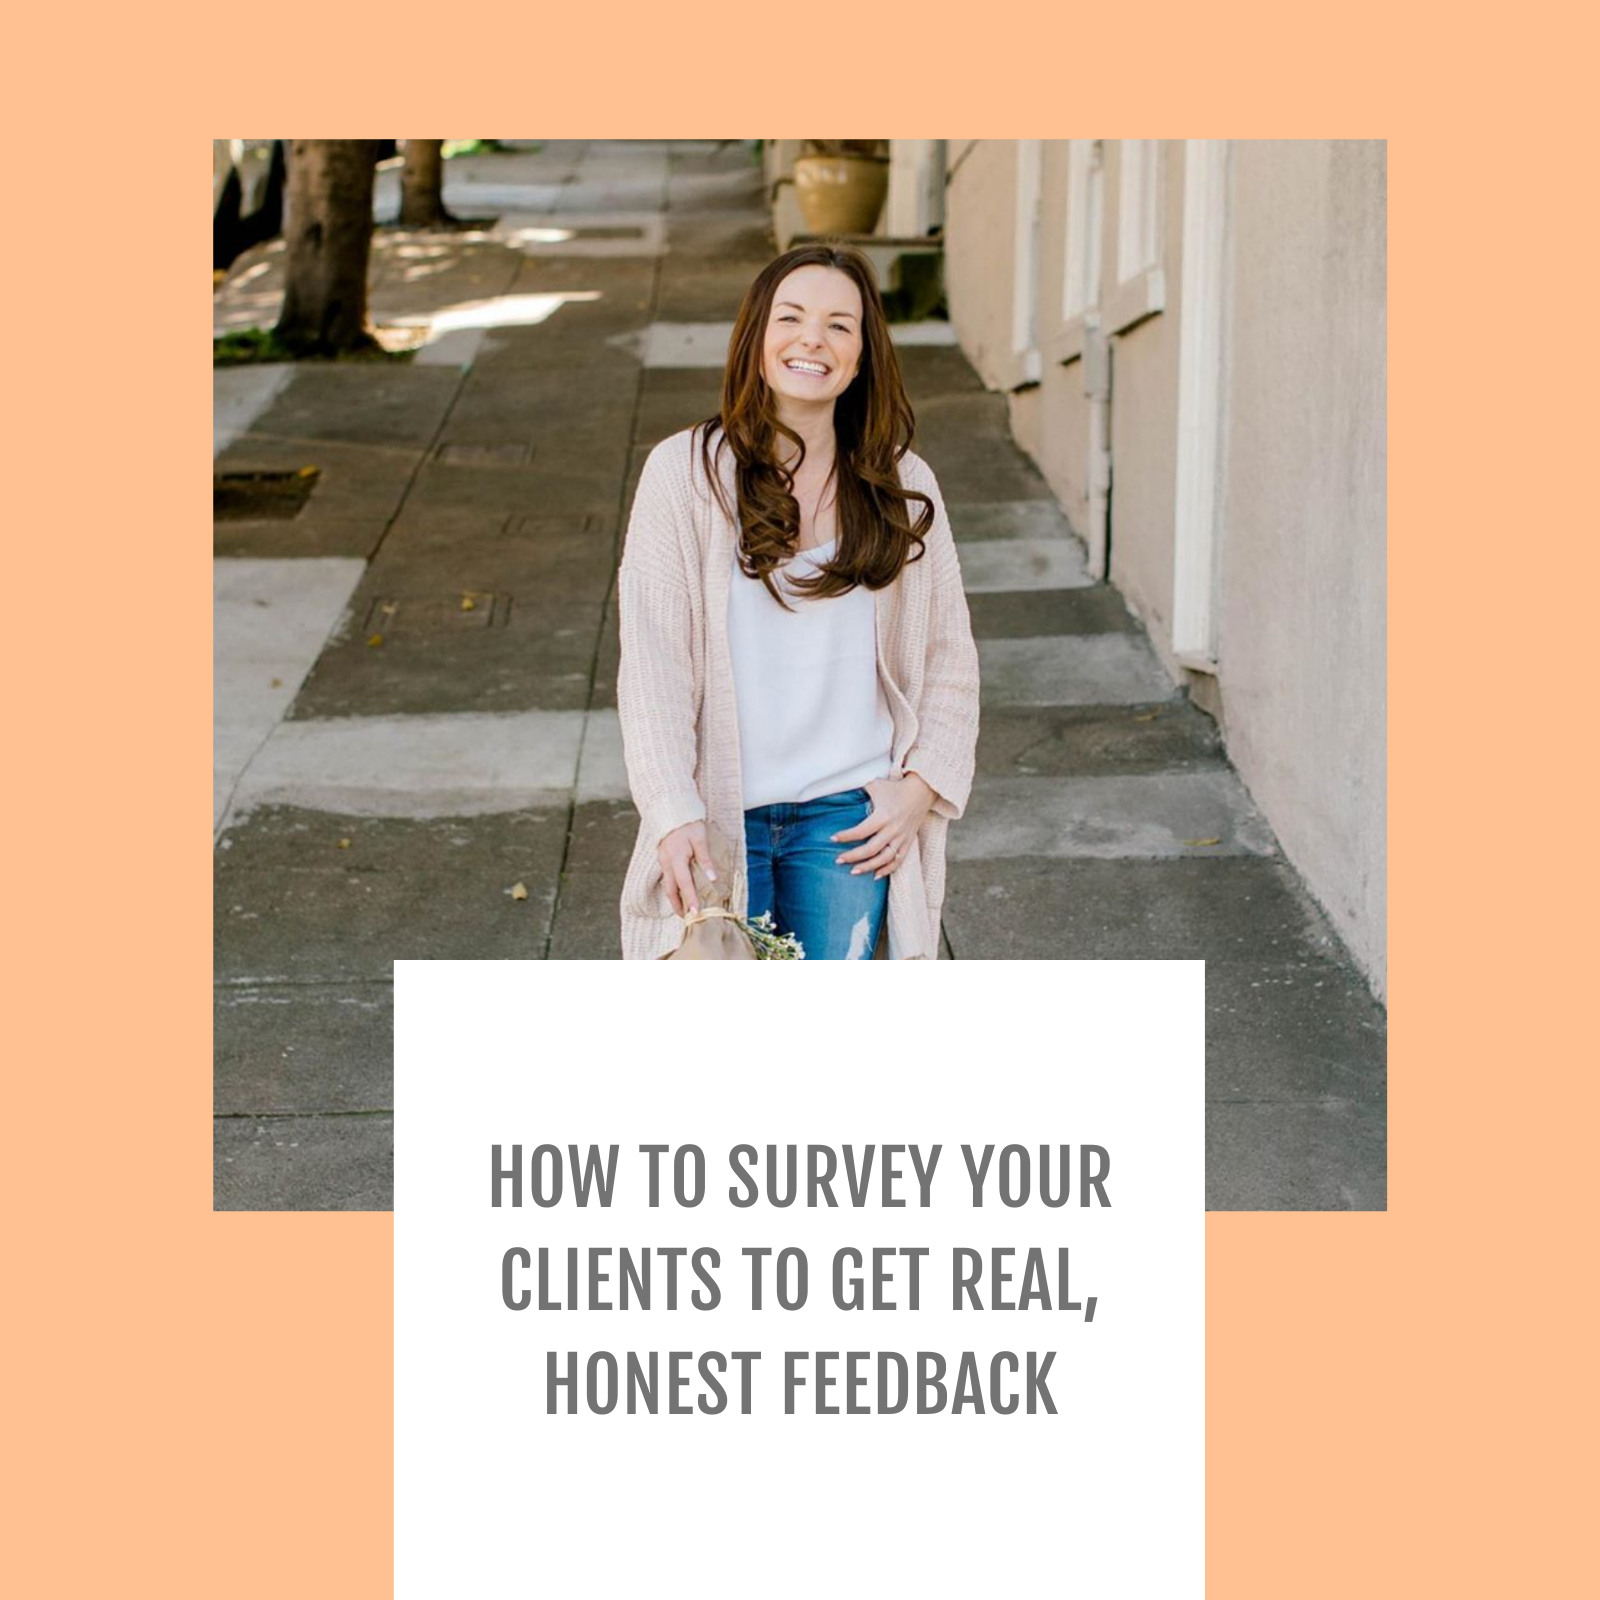 Episode #054 How to survey your clients to get real, honest feedback